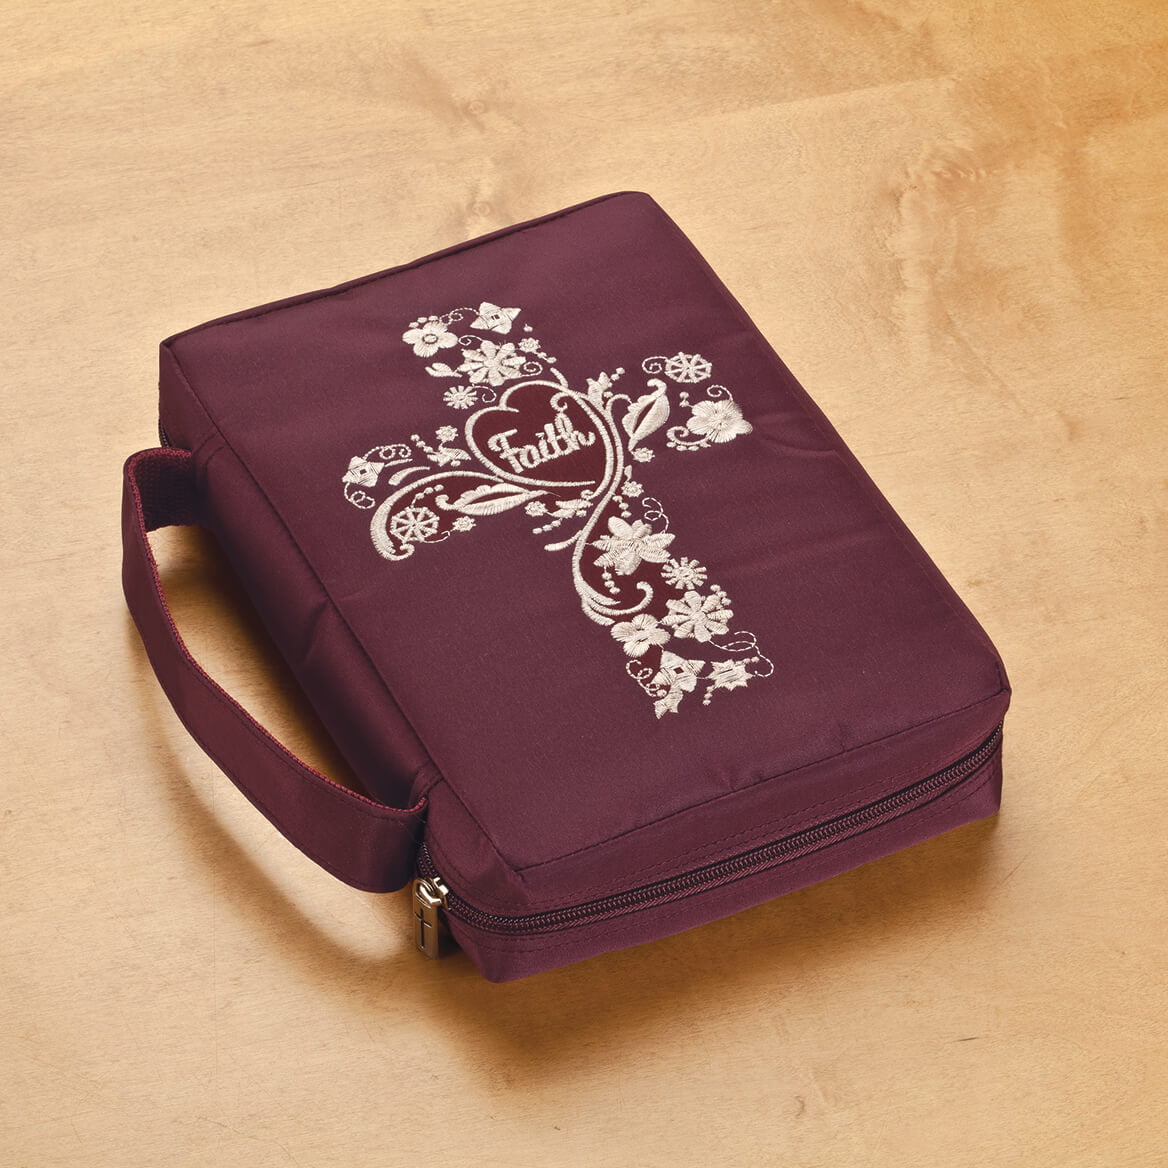 Jasmine Leaves Bible Cover Case for Women with a Matched Bookmark Floral PU Leather Bible Cover Bag with Pockets and Zipper for Standard and Large Size Study Bible 10.5x8x2.5 